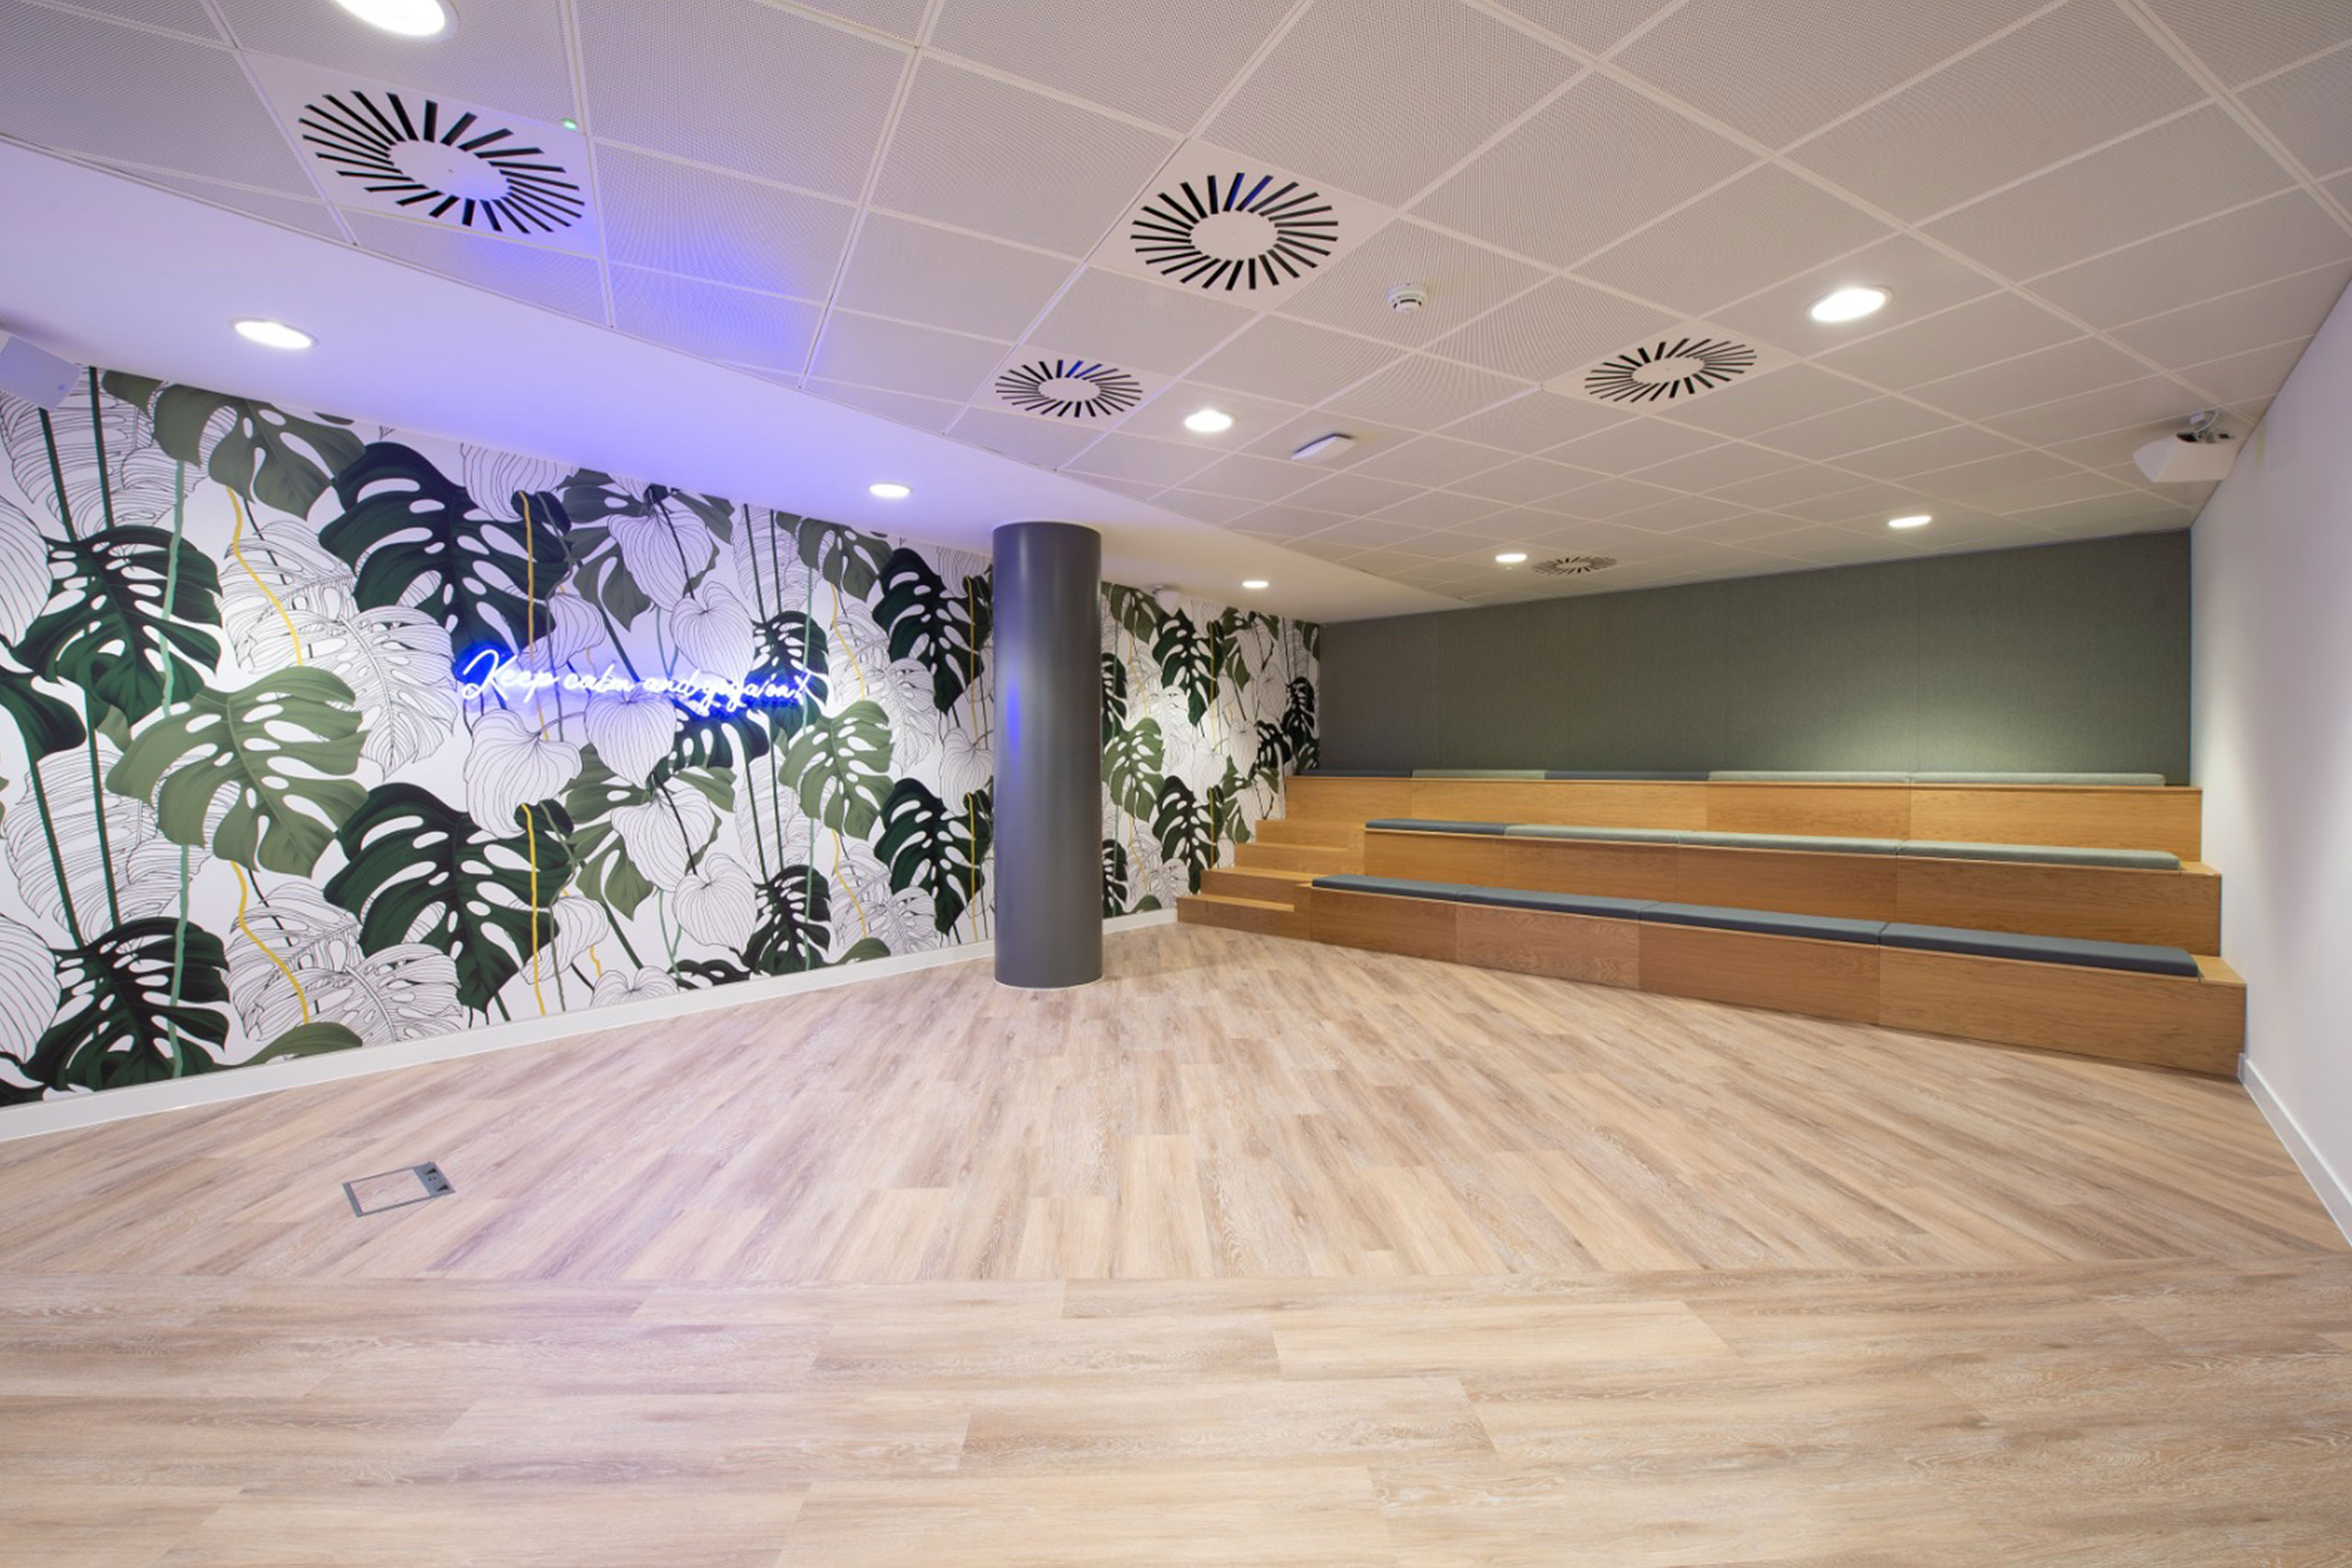 Meeting Rooms in Reading